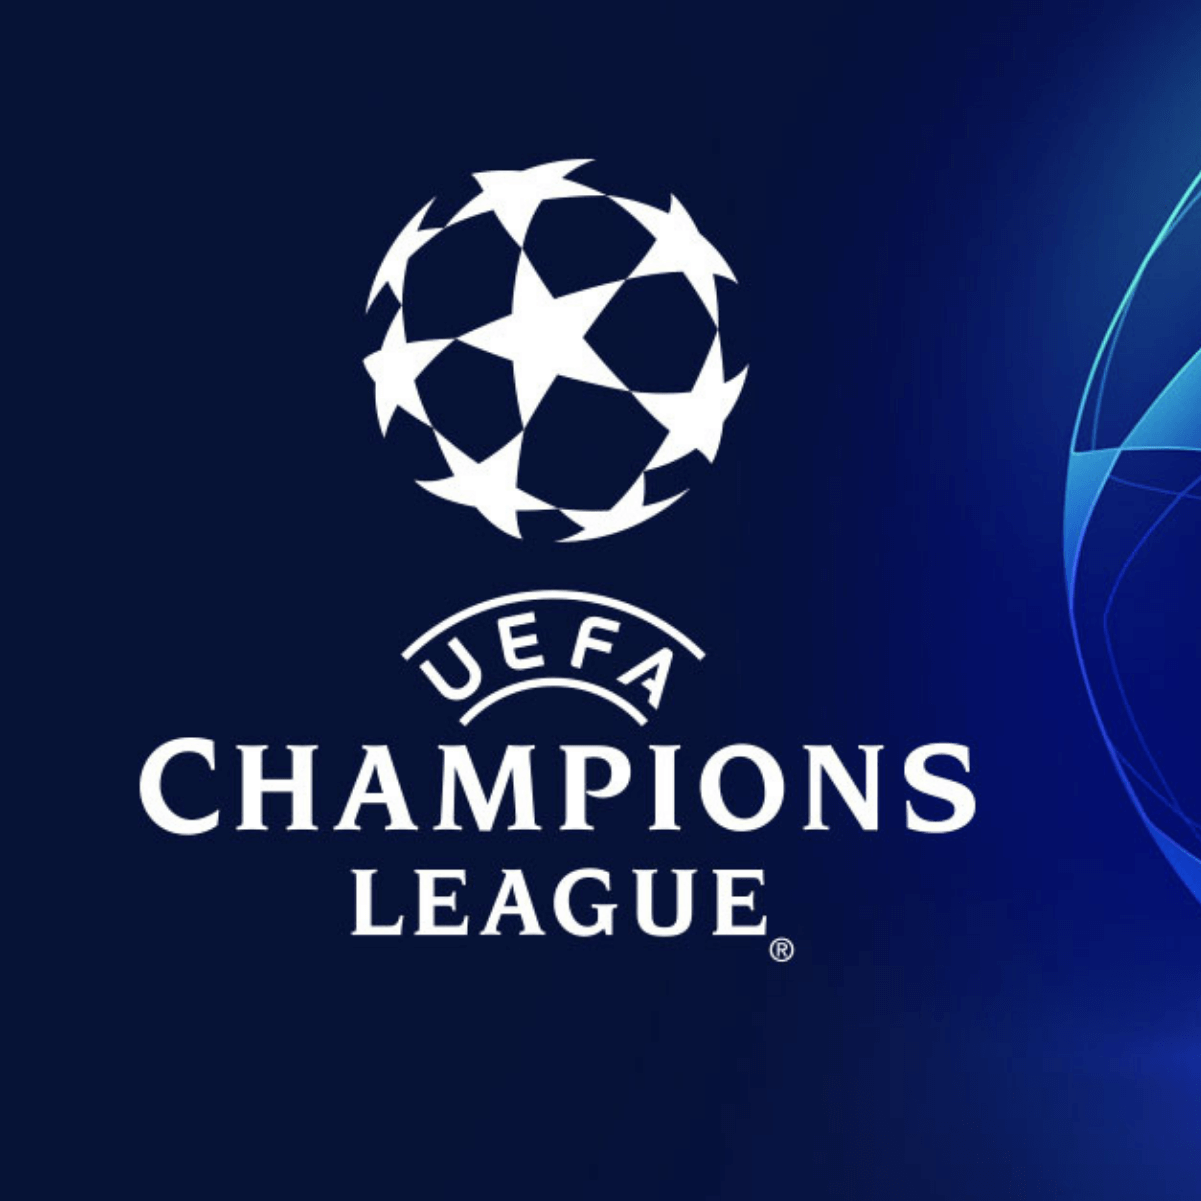 Officer fusion marked How to Watch UEFA Champions League on FireStick for Free